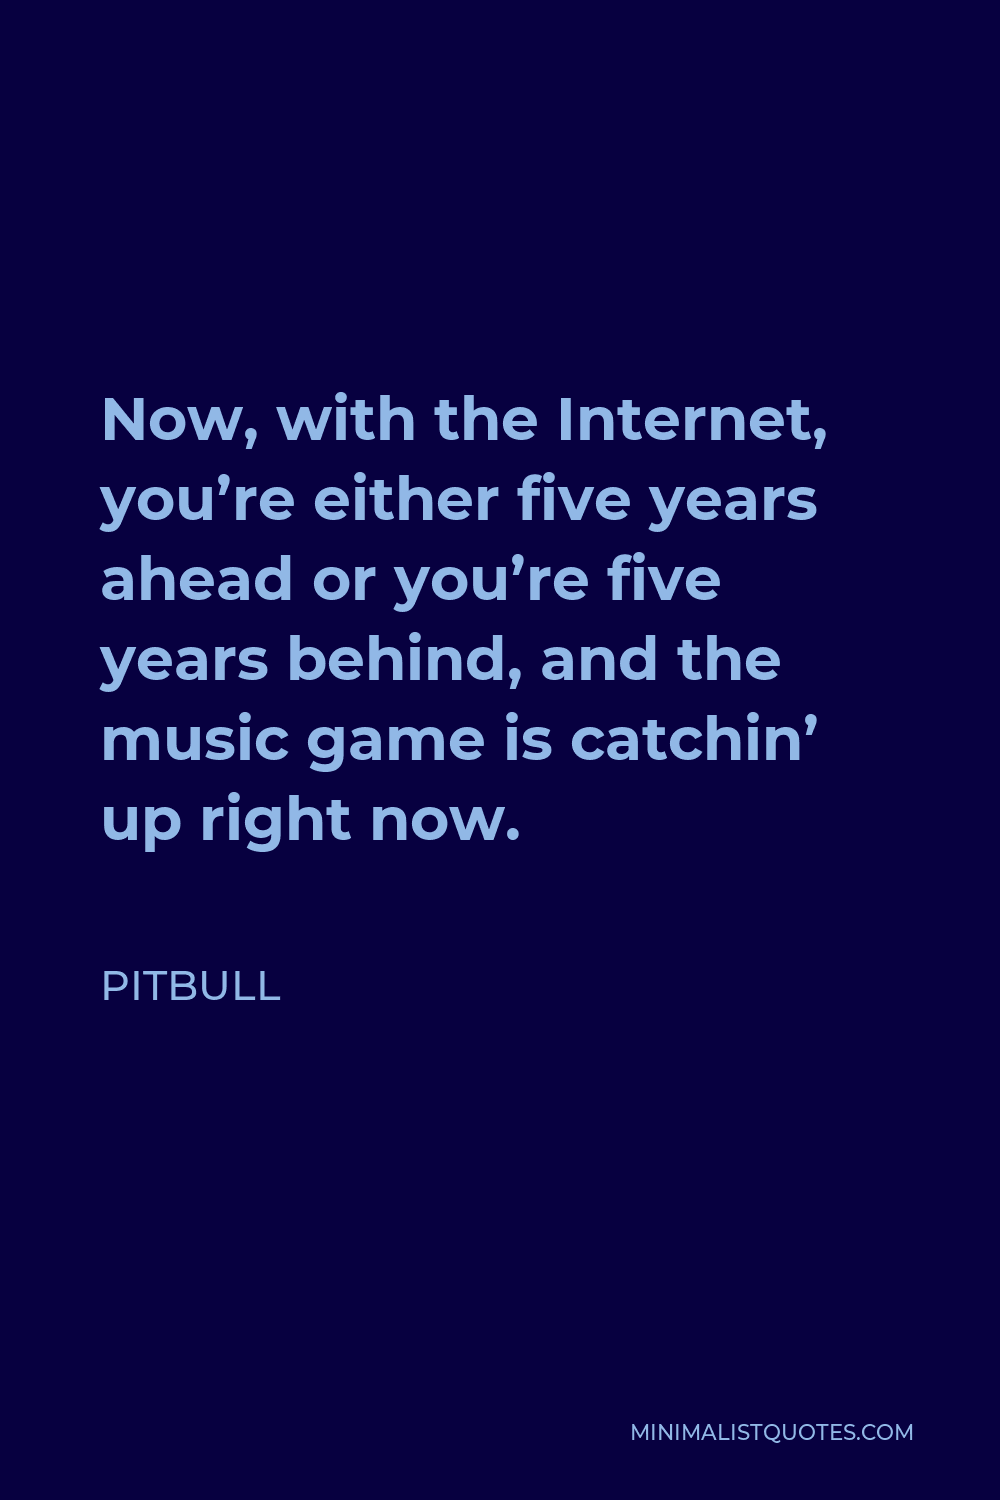 Pitbull Quote - Now, with the Internet, you’re either five years ahead or you’re five years behind, and the music game is catchin’ up right now.